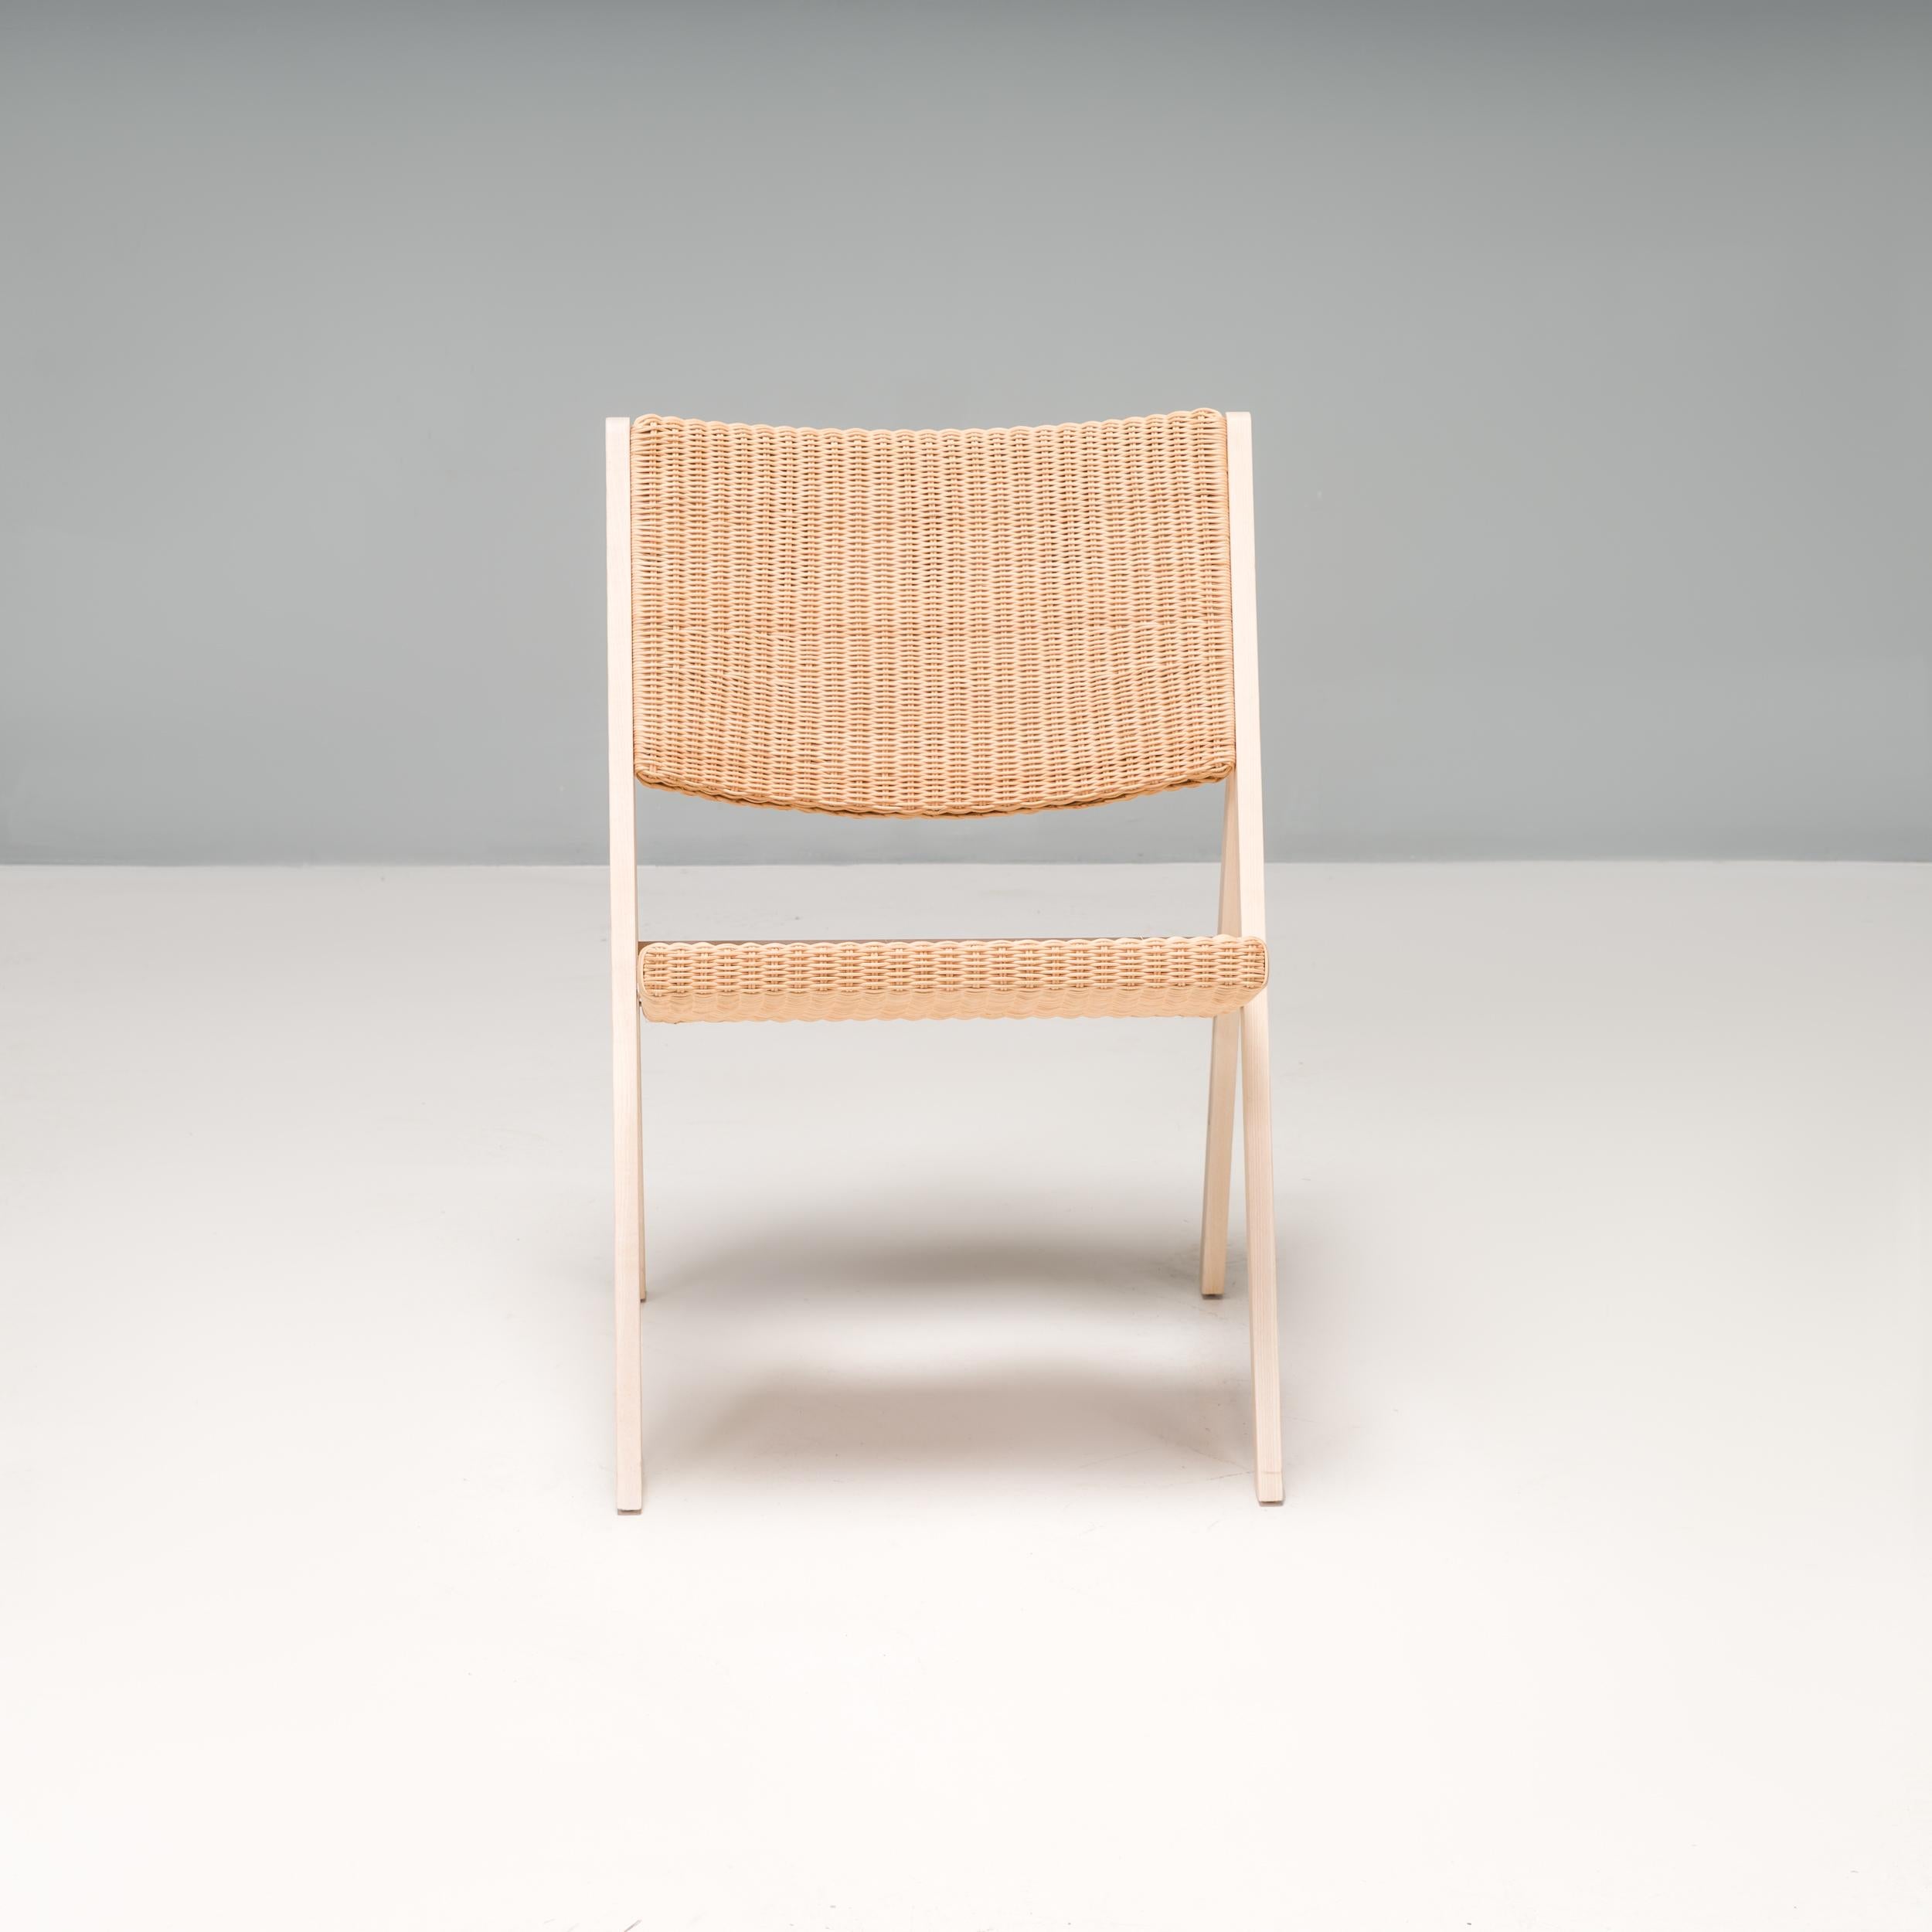 Gio Ponti for Molteni&C D.270.1 Wicker Folding Chairs, Set of 2 For Sale 1